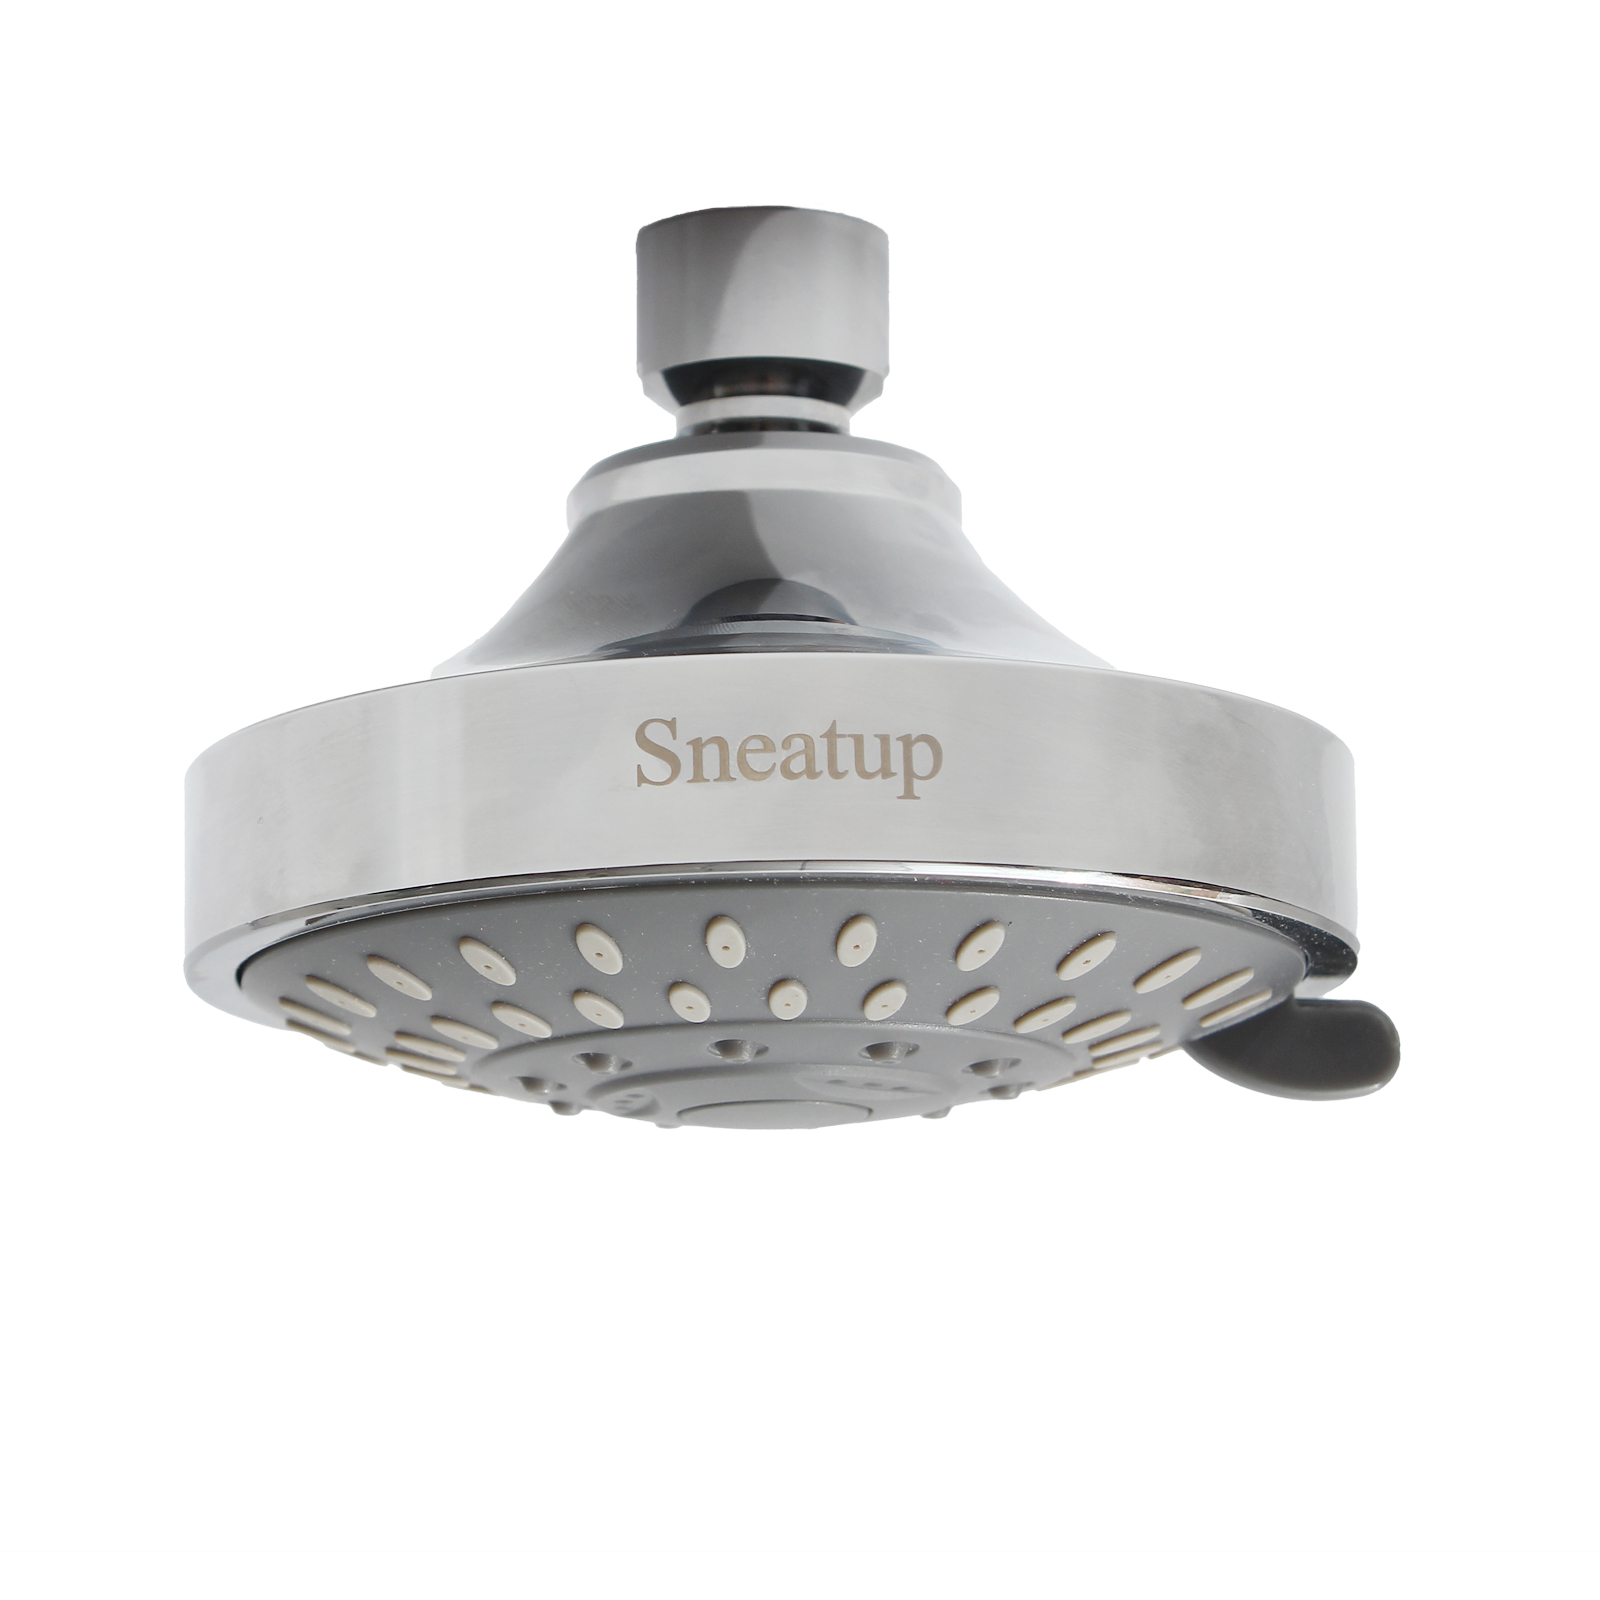 Sneatup Shower heads，4-Inch Rainfall High Pressure Shower Head,Luxury Spa Fixed Showerhead,Adjustable Swivel Joint, 5 Spray Settings Fits Shower Arm Cylindrical Thread Outer Diameter 19 mm